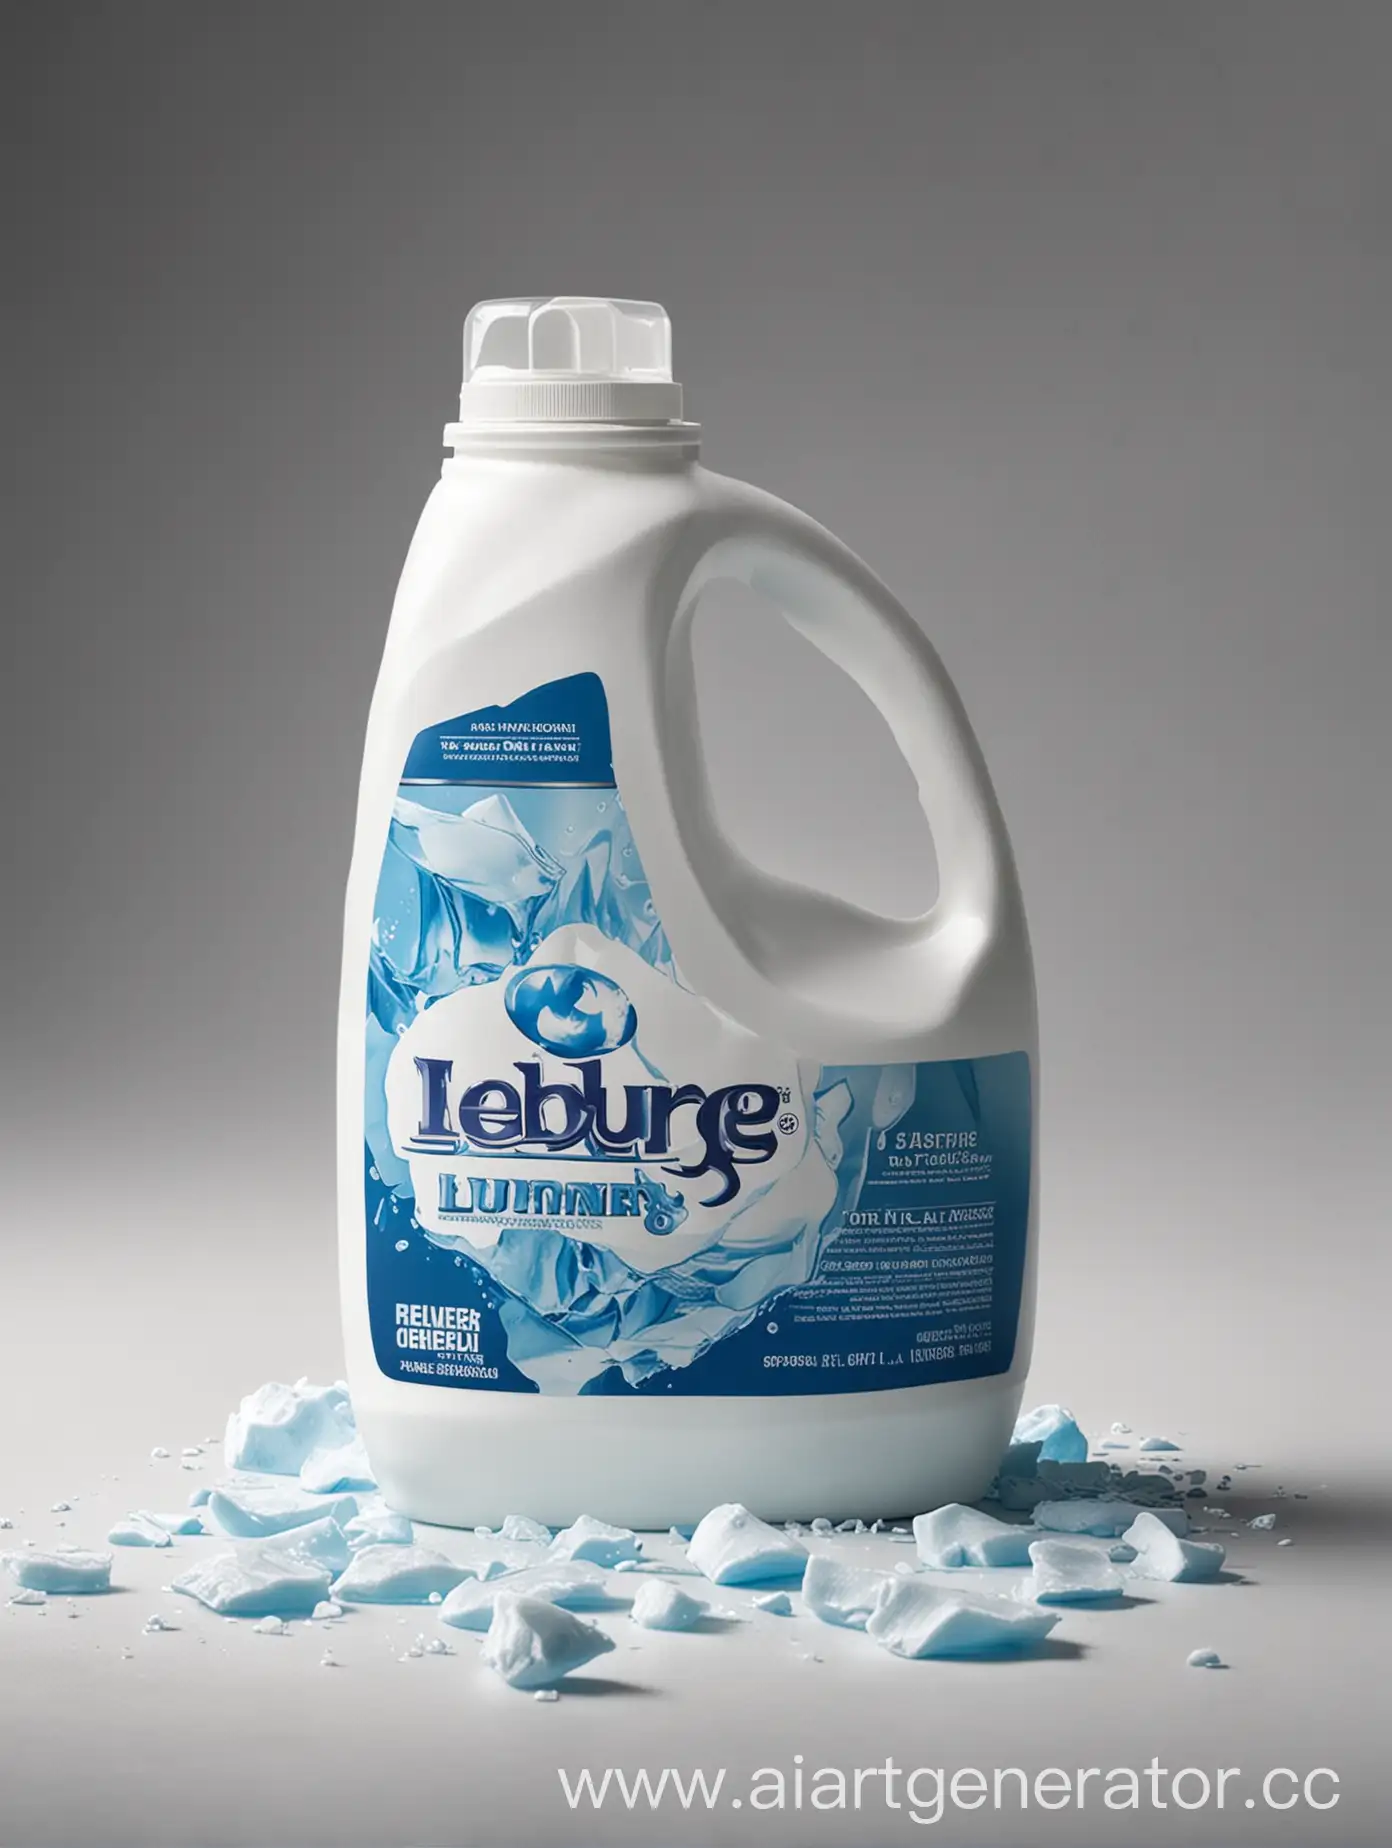 Promotional-Picture-of-ICEBERG-Laundry-Detergent